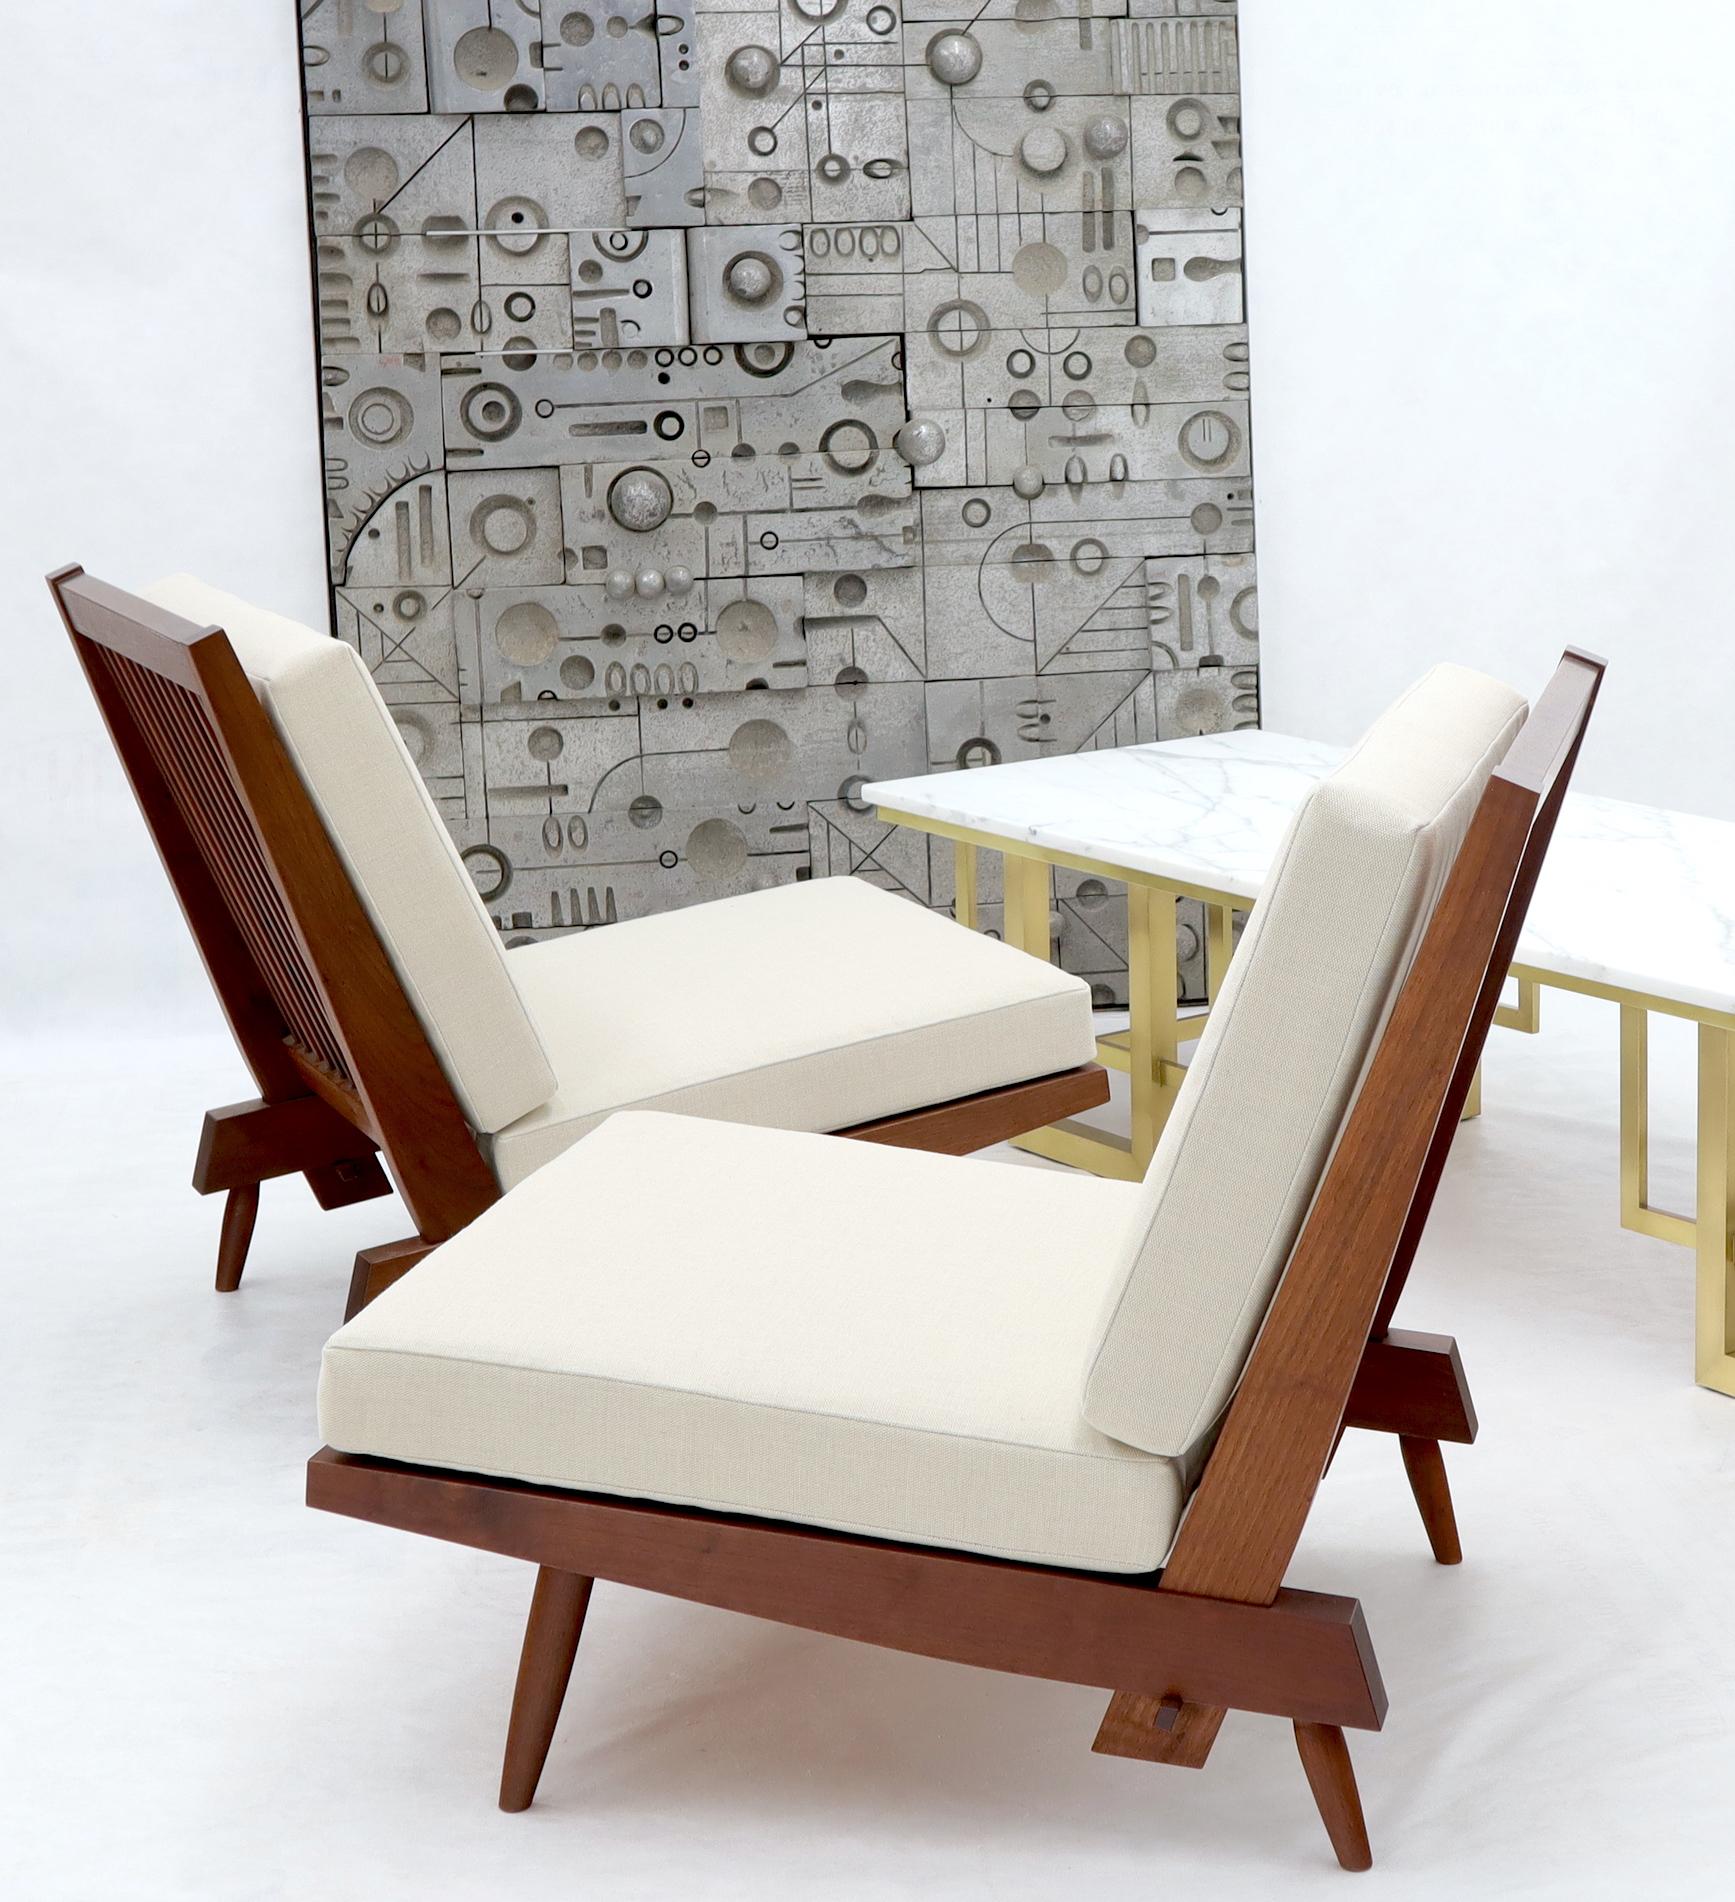 Pair of George Nakashima American walnut lounge chairs. Stunning jewelry like woodwork by George Nakashima from circa 1962. Excellent condition. New cushions.